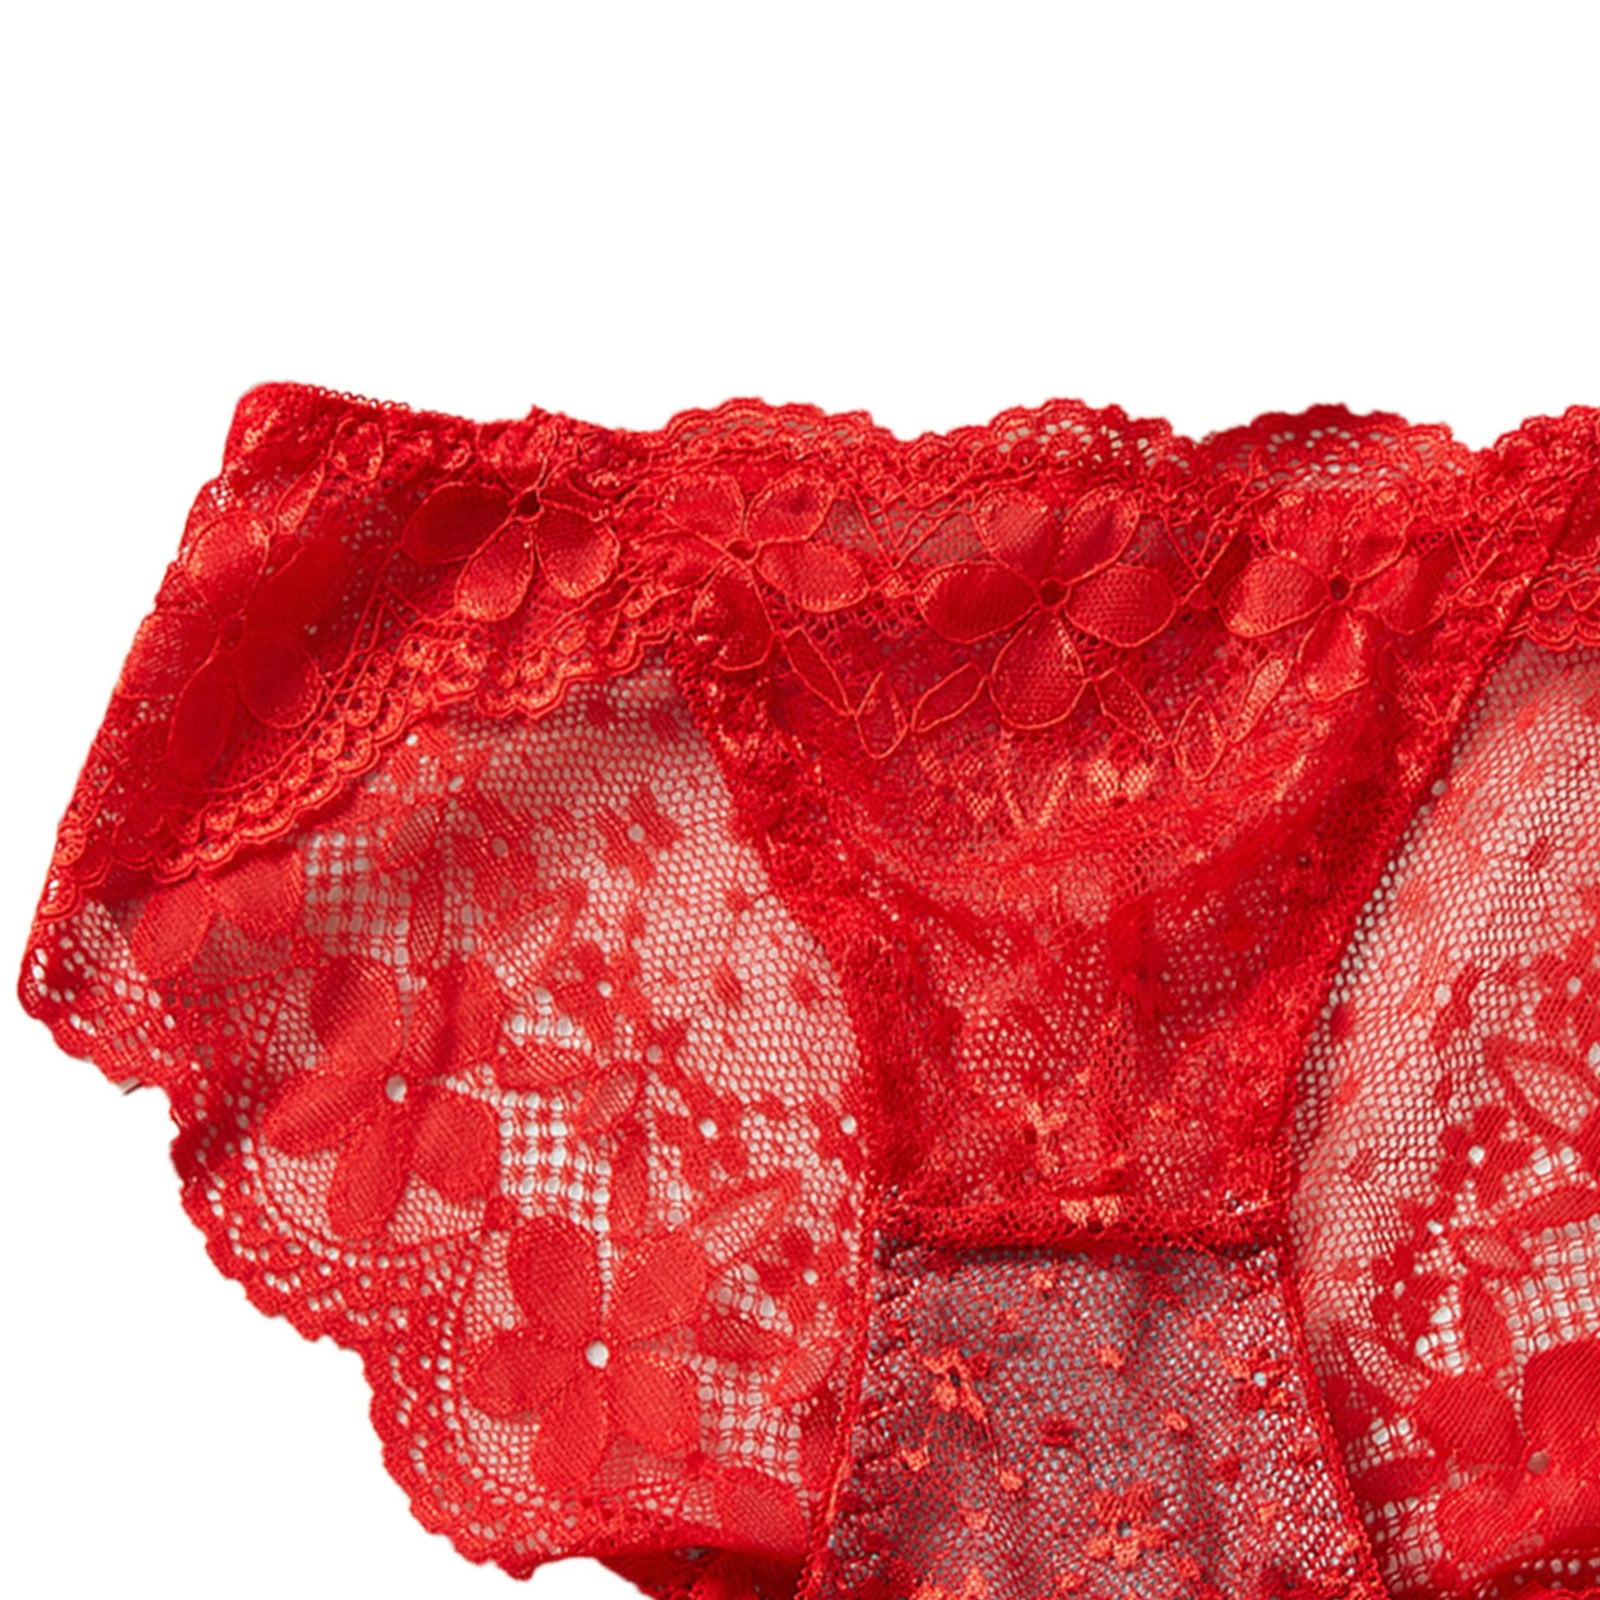 Women Panties Womens Red Lace Breathable Lace Hollow Out And Raise The Pure  Brief Panties 